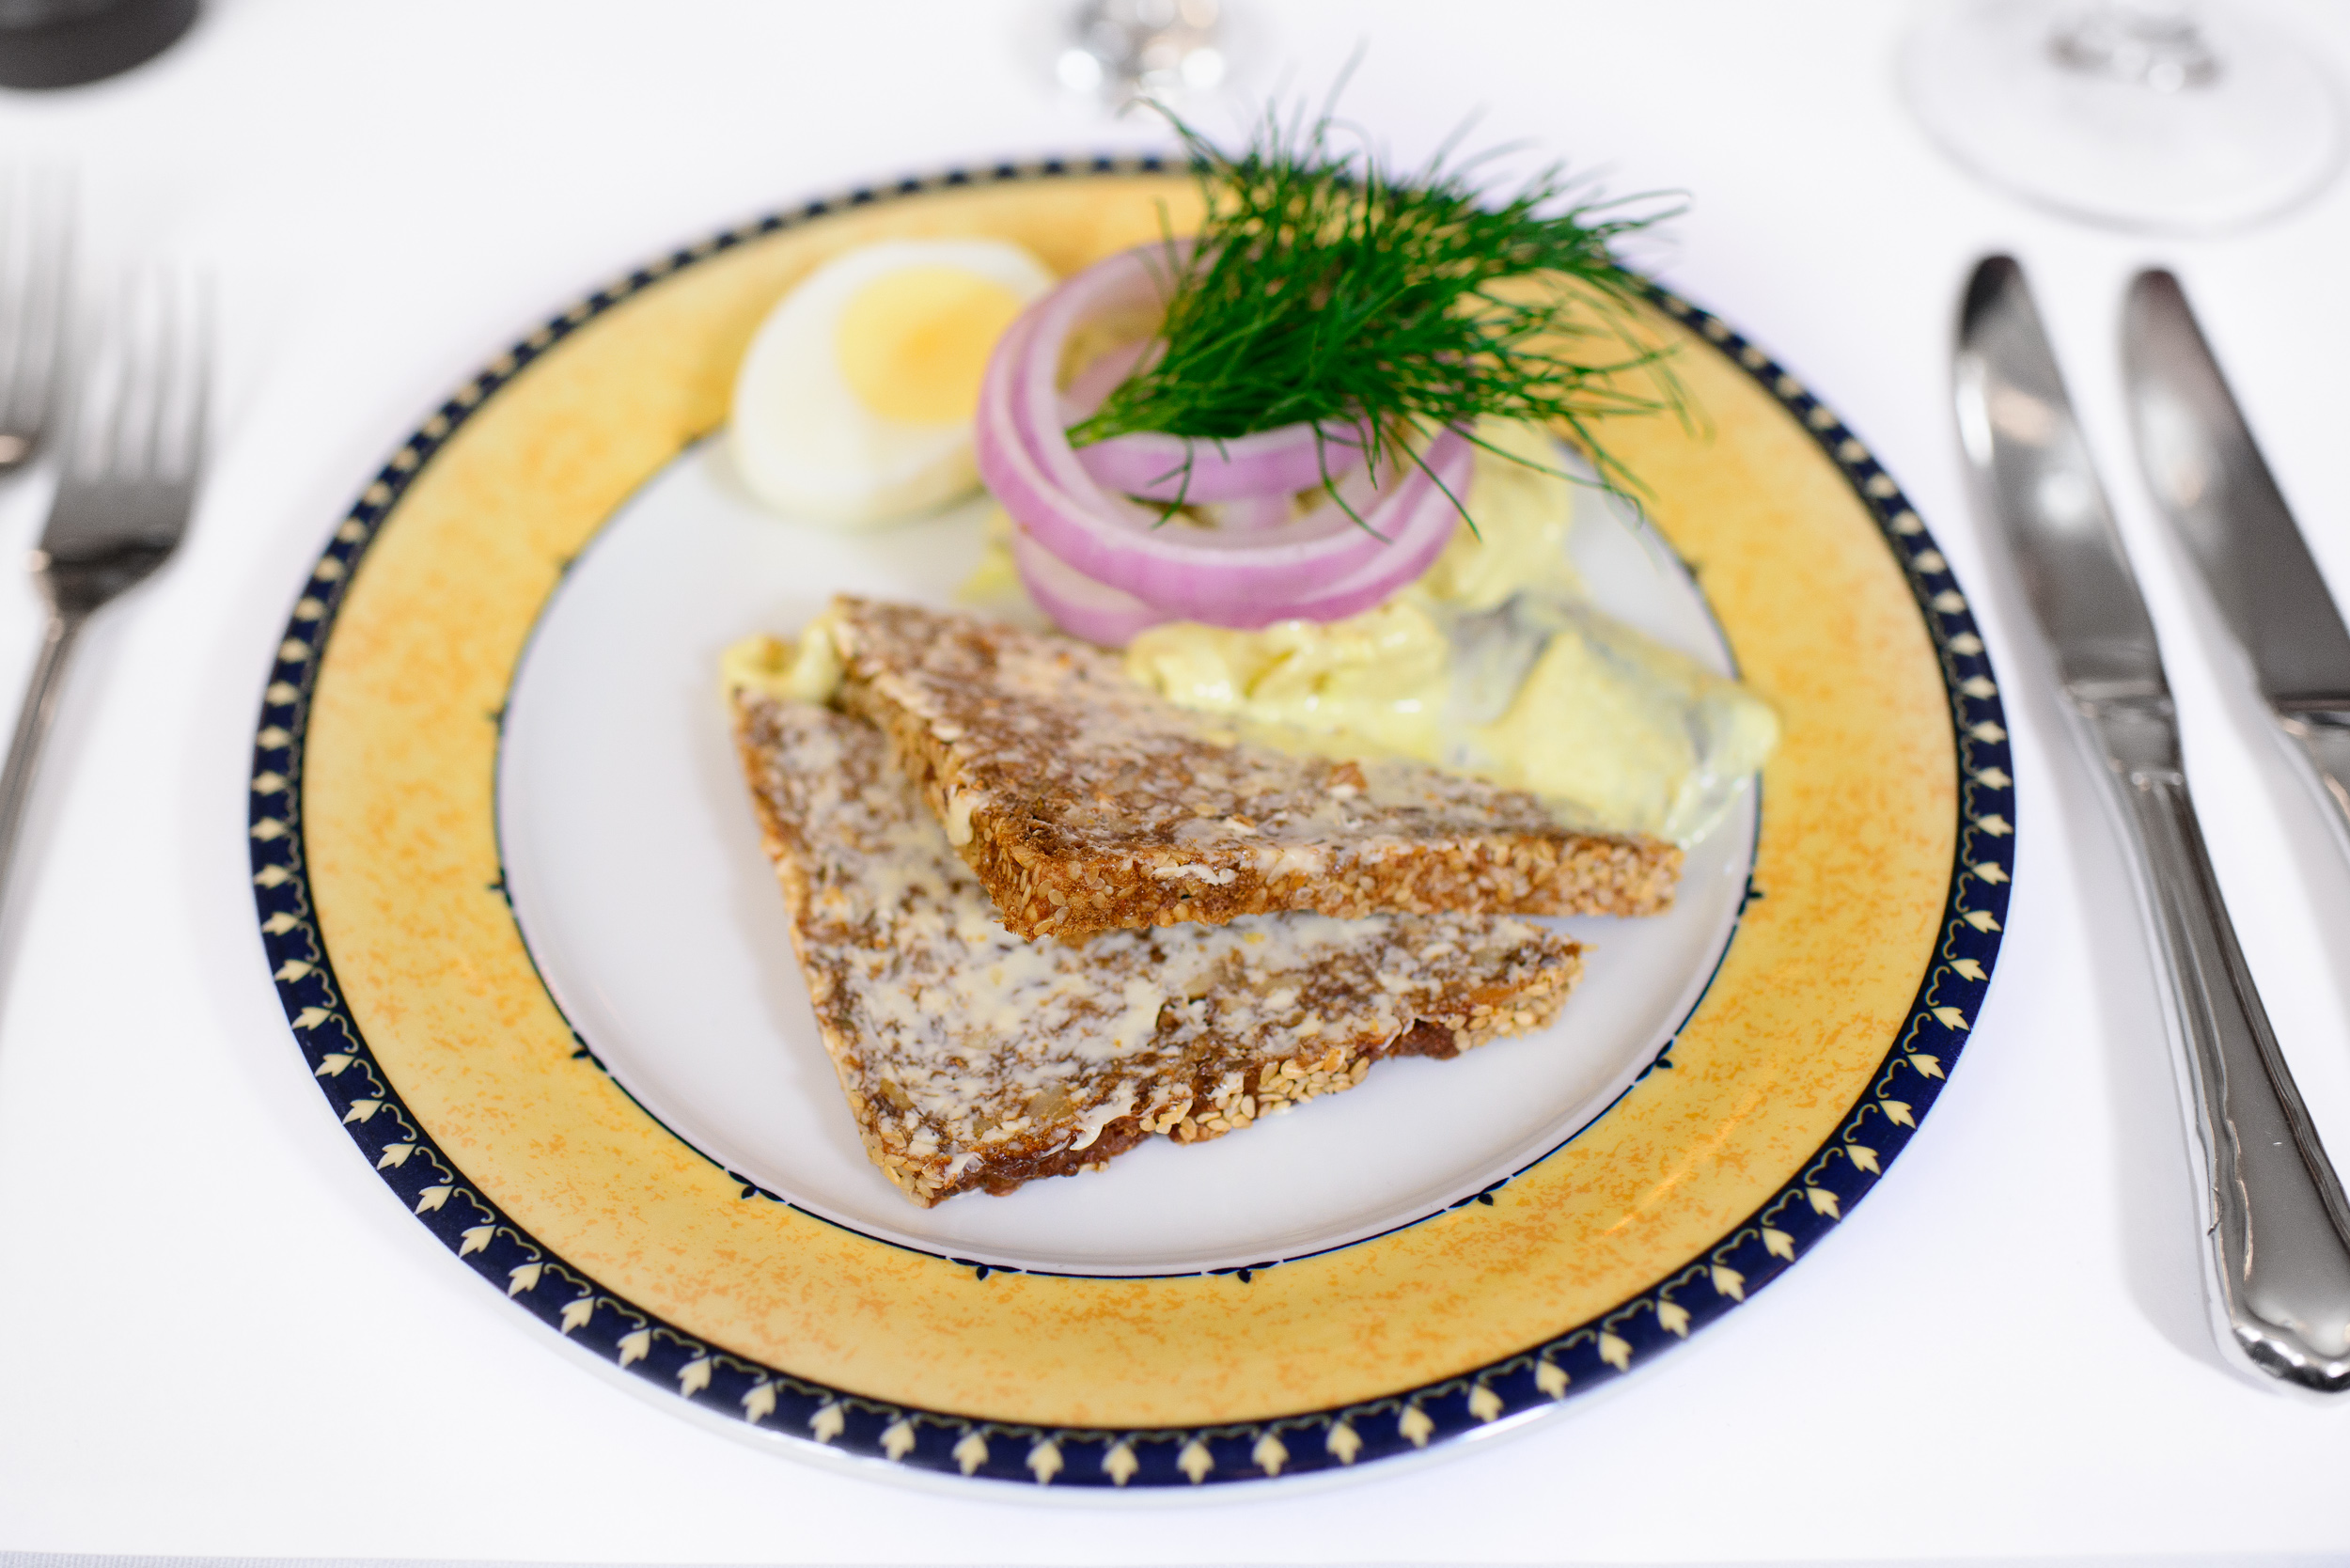 Curry-spiced herring of the house, served with egg